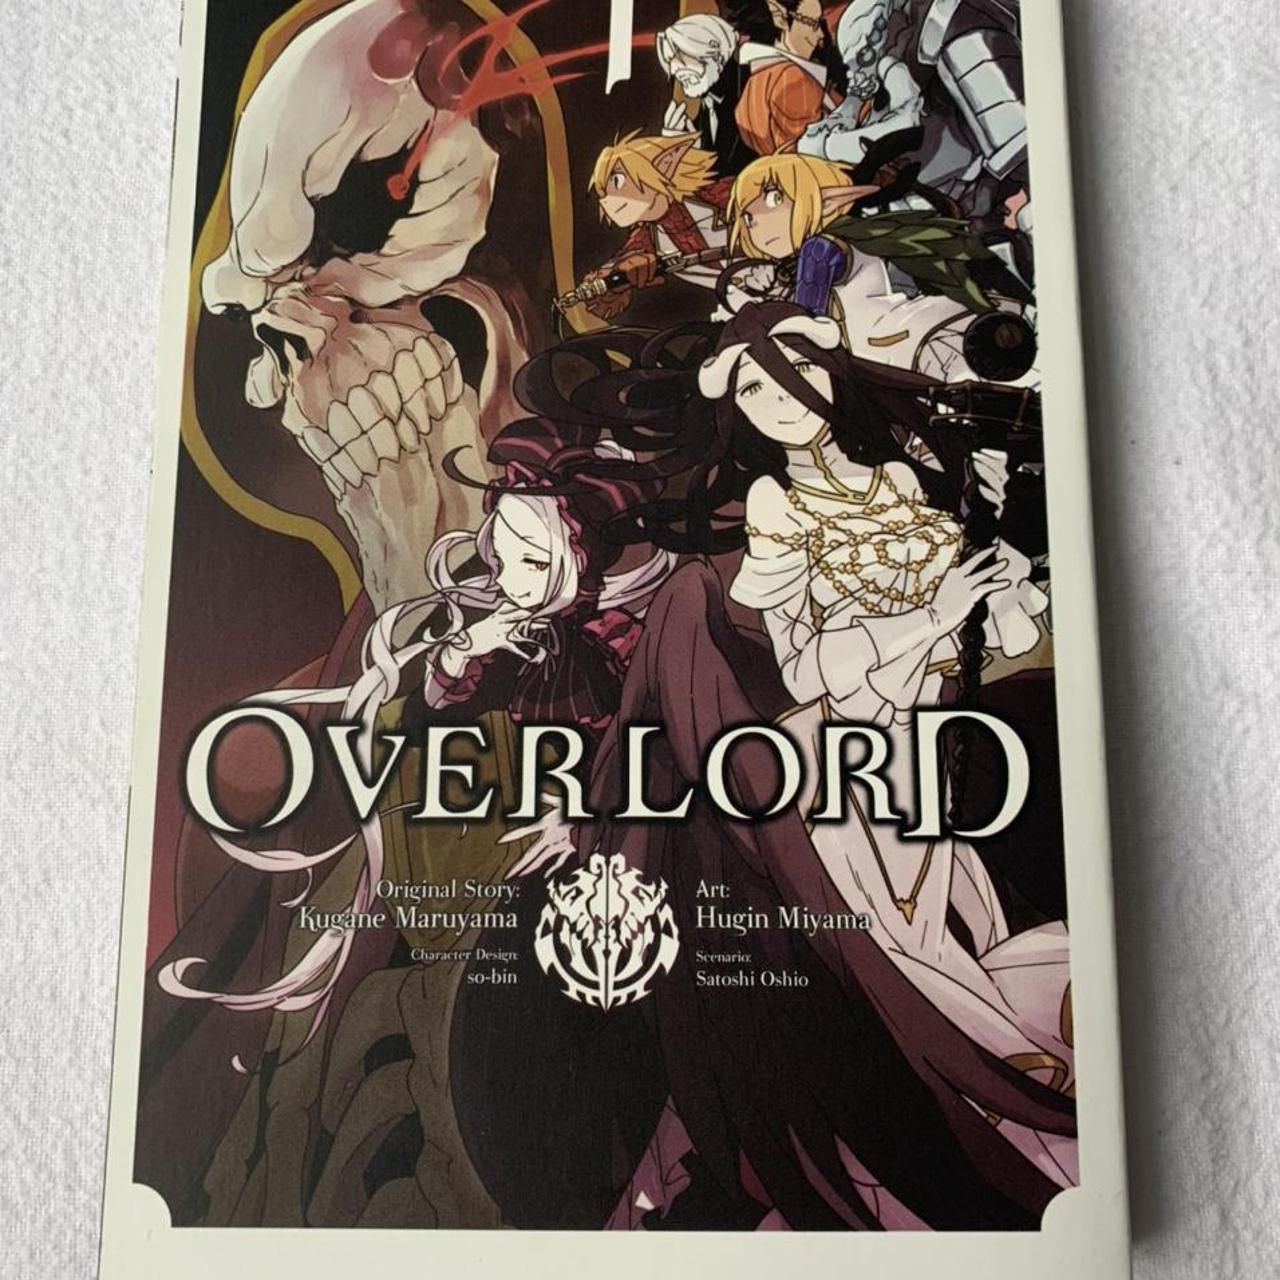 Product Image 1 - Overlord Manga Vol 1 [ENG]

Great